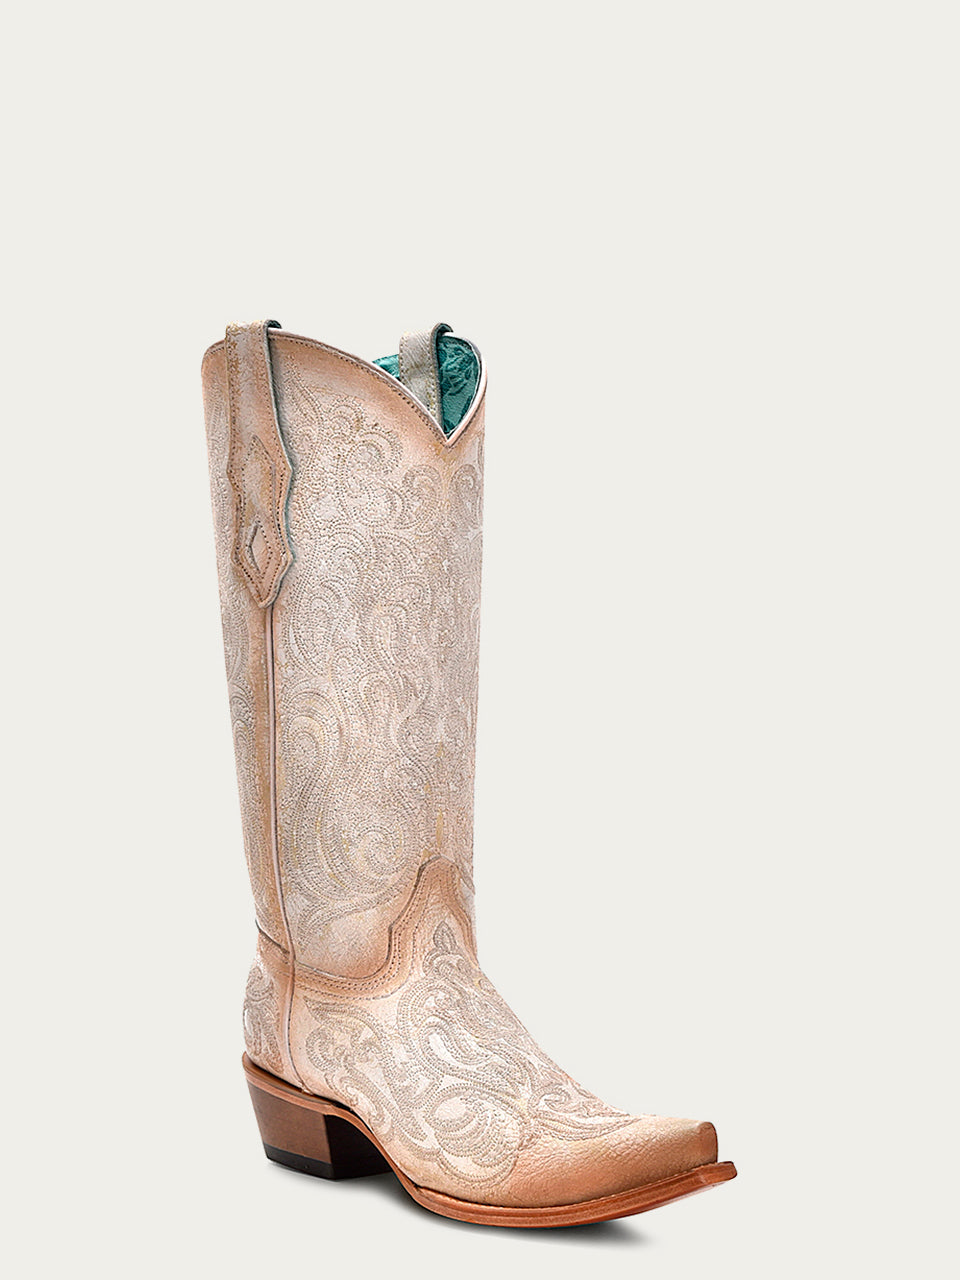 C4143 - WOMEN'S PINK LUMINESCENT EMBROIDERY CRACKLED STRAW SNIP TOE COWBOY BOOT